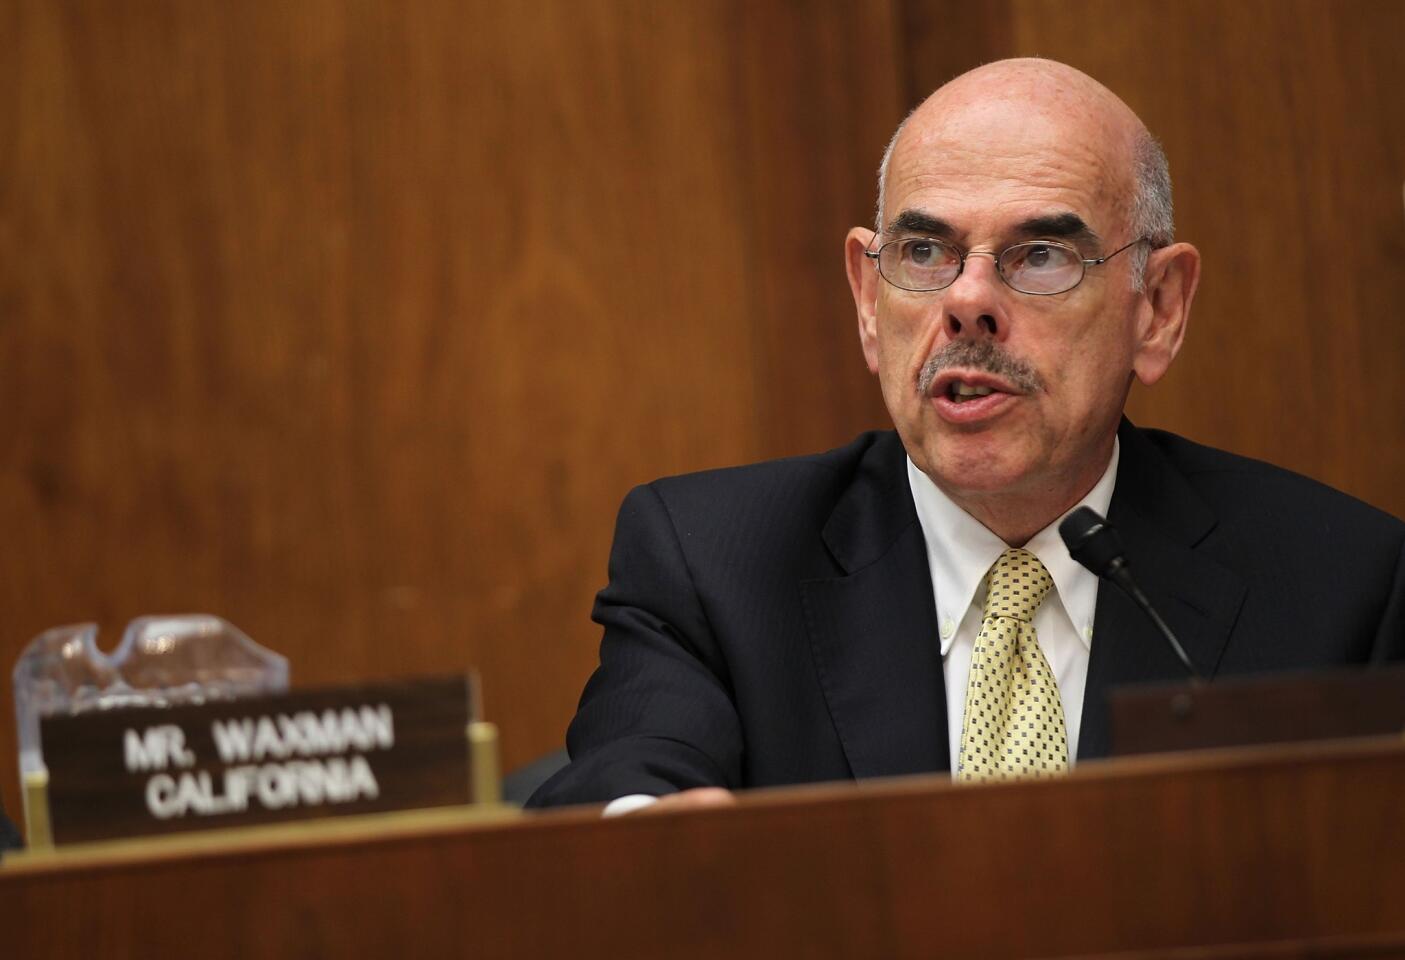 Elected in 1974, U.S. Rep. Henry Waxman (D-Beverly Hills) announced Jan. 31 that he would end his 40-year run as one of the House's most liberal members.